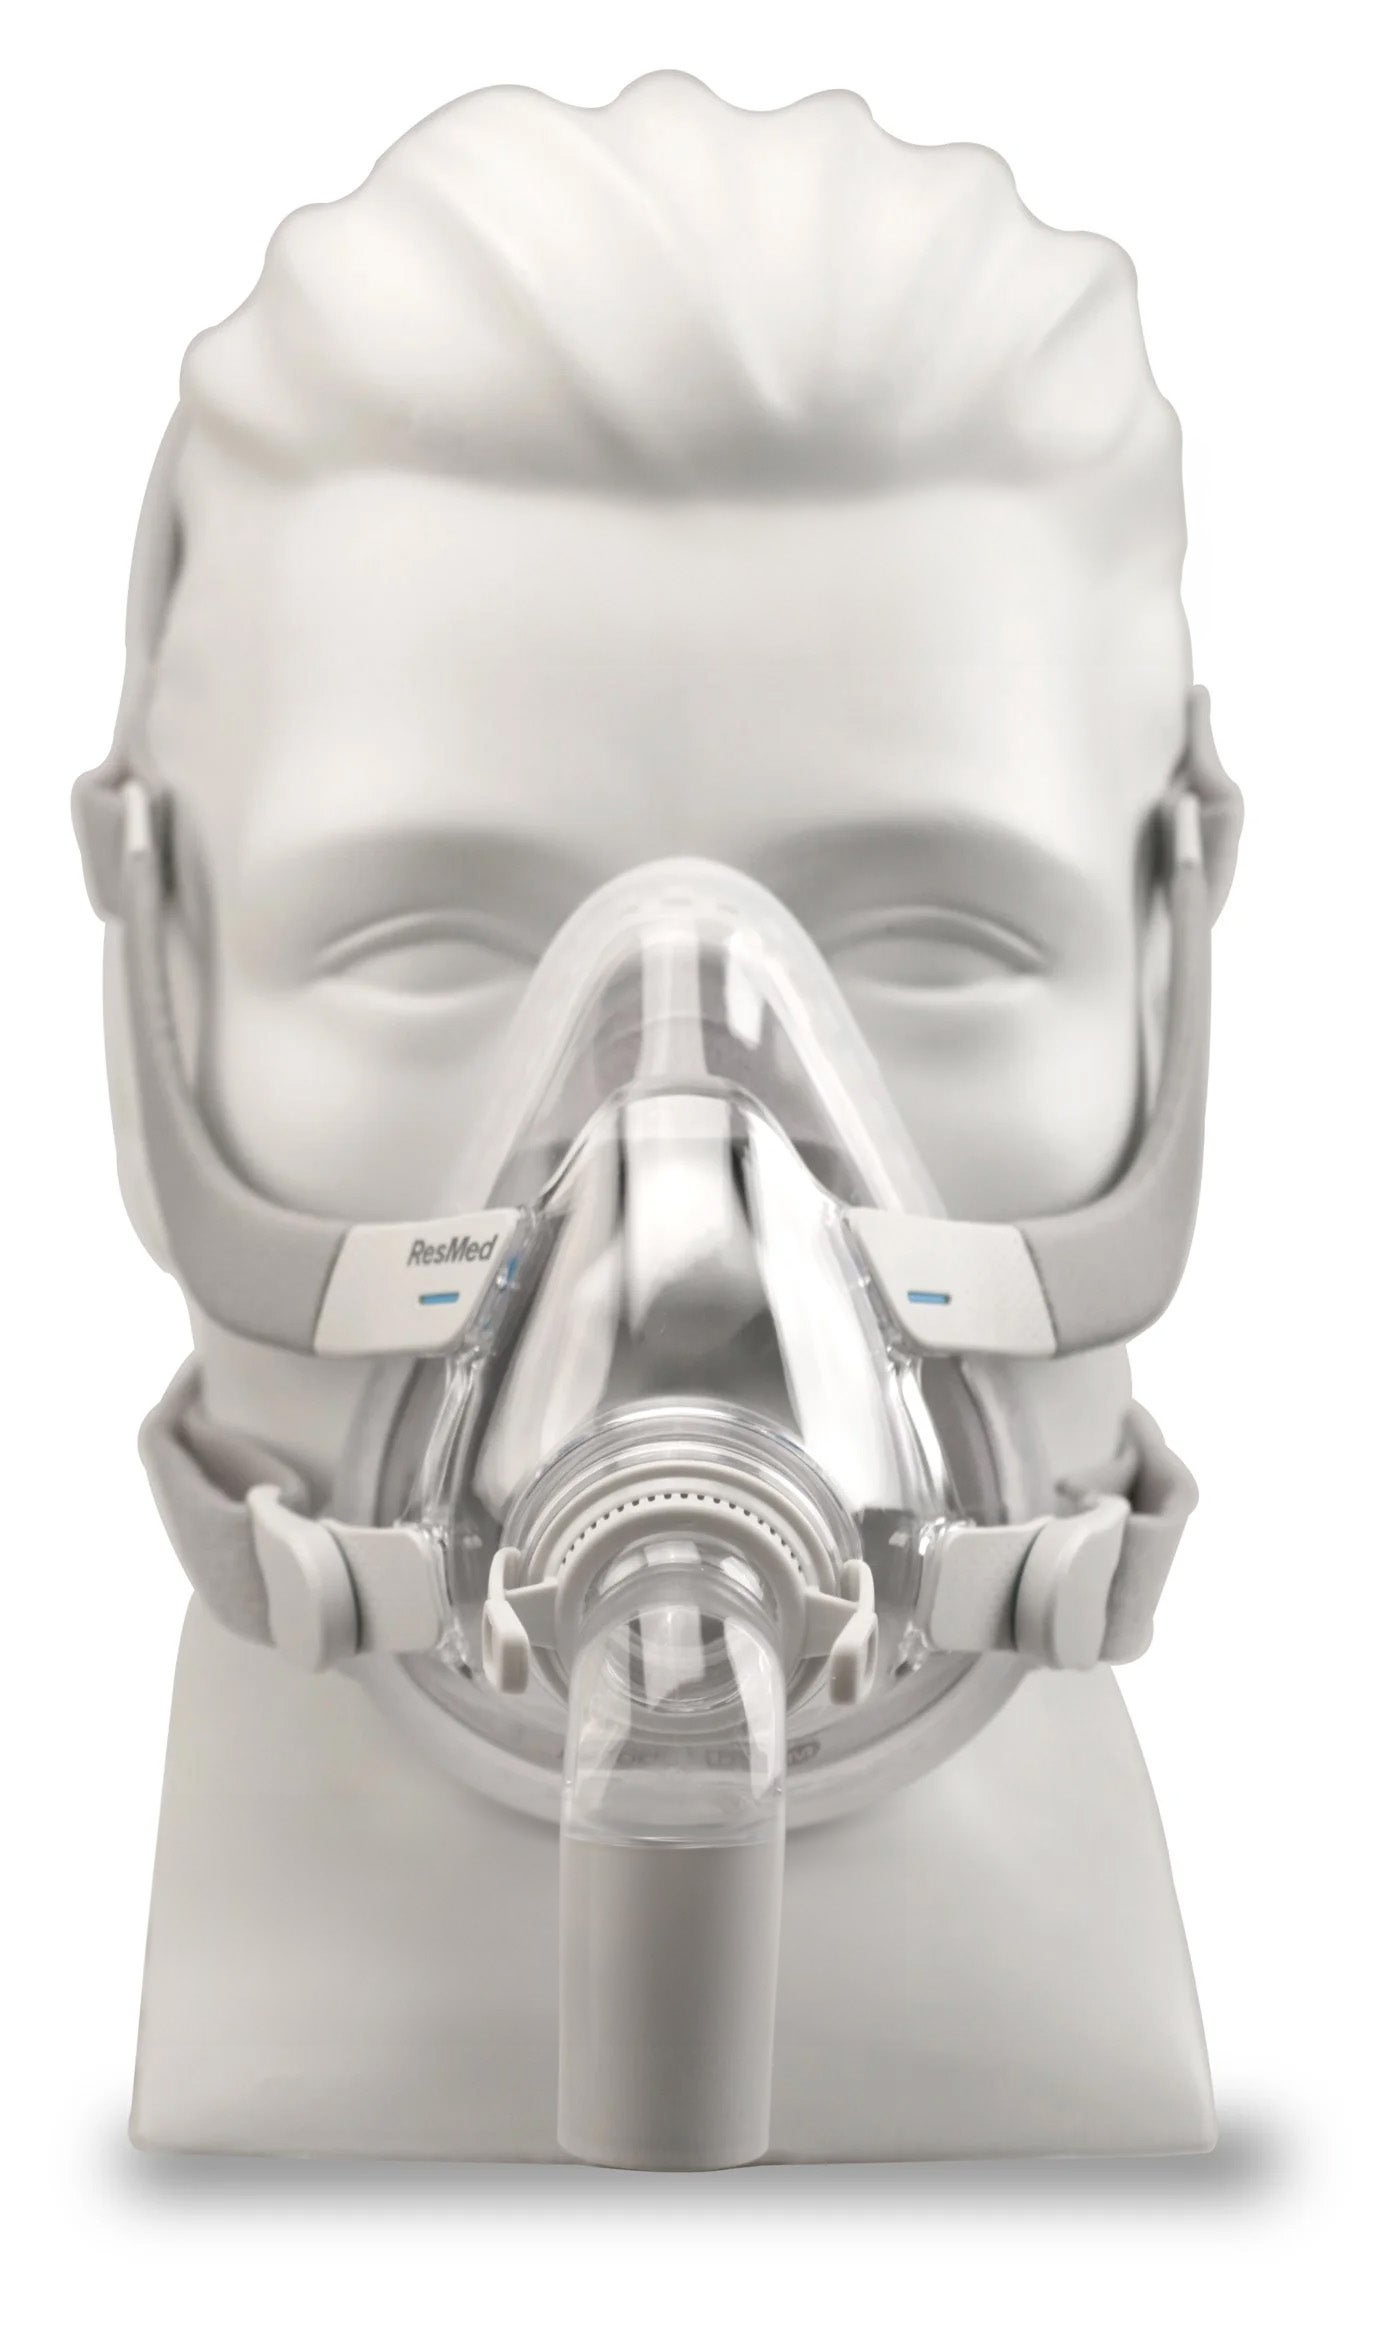 Resmed Airtouch F20™ Full Face Cpap Mask With Headgear 7204